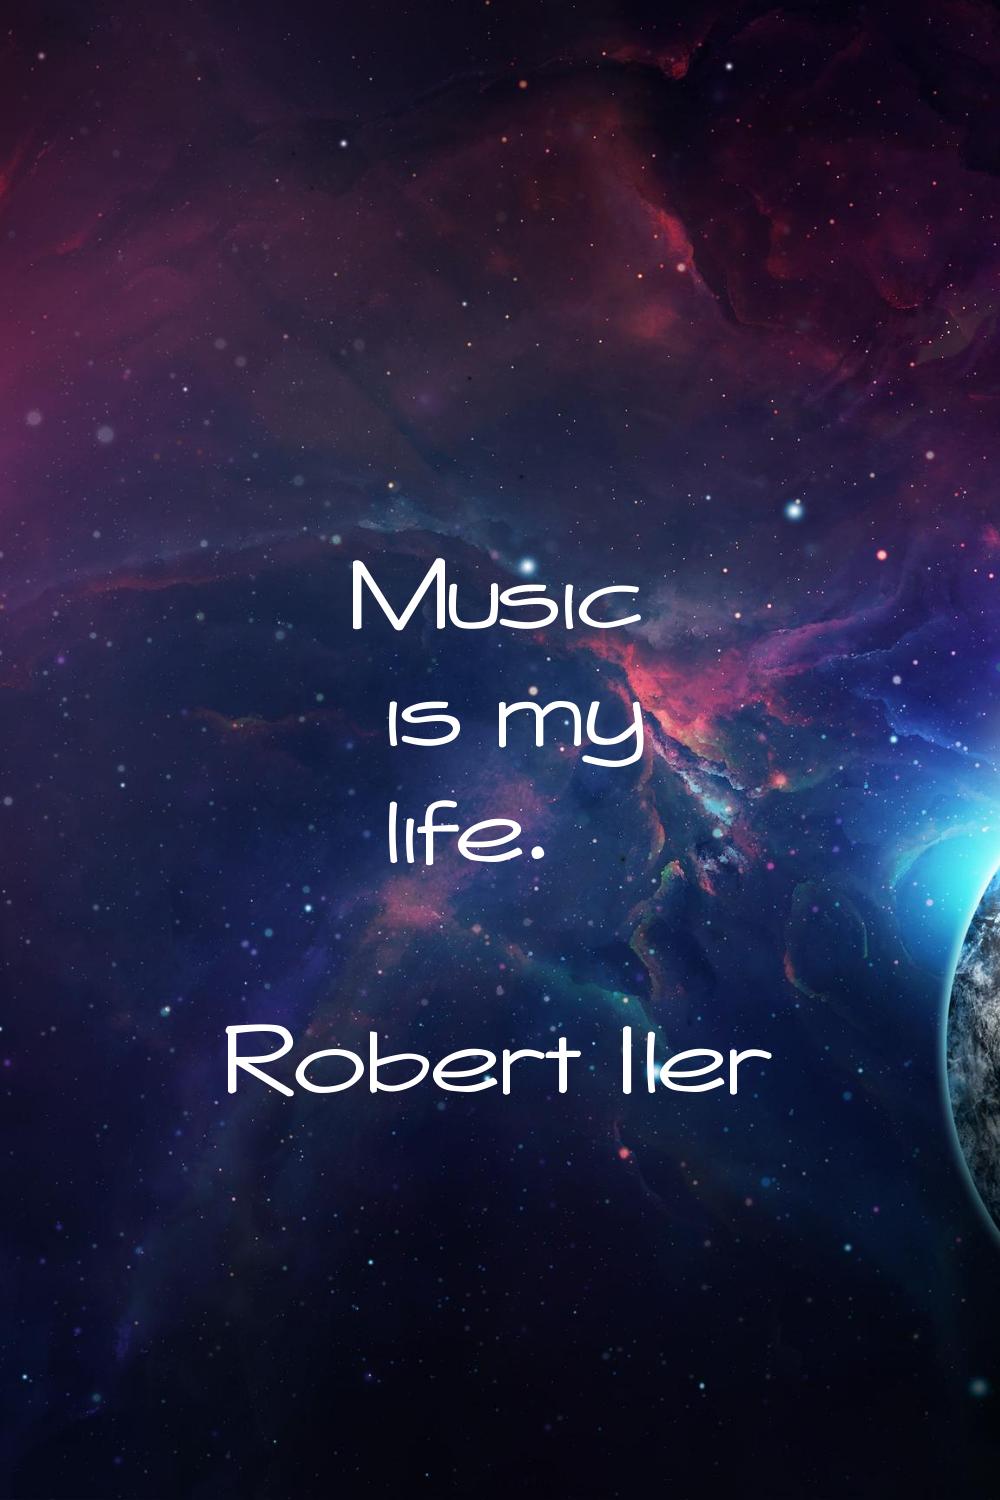 Music is my life.